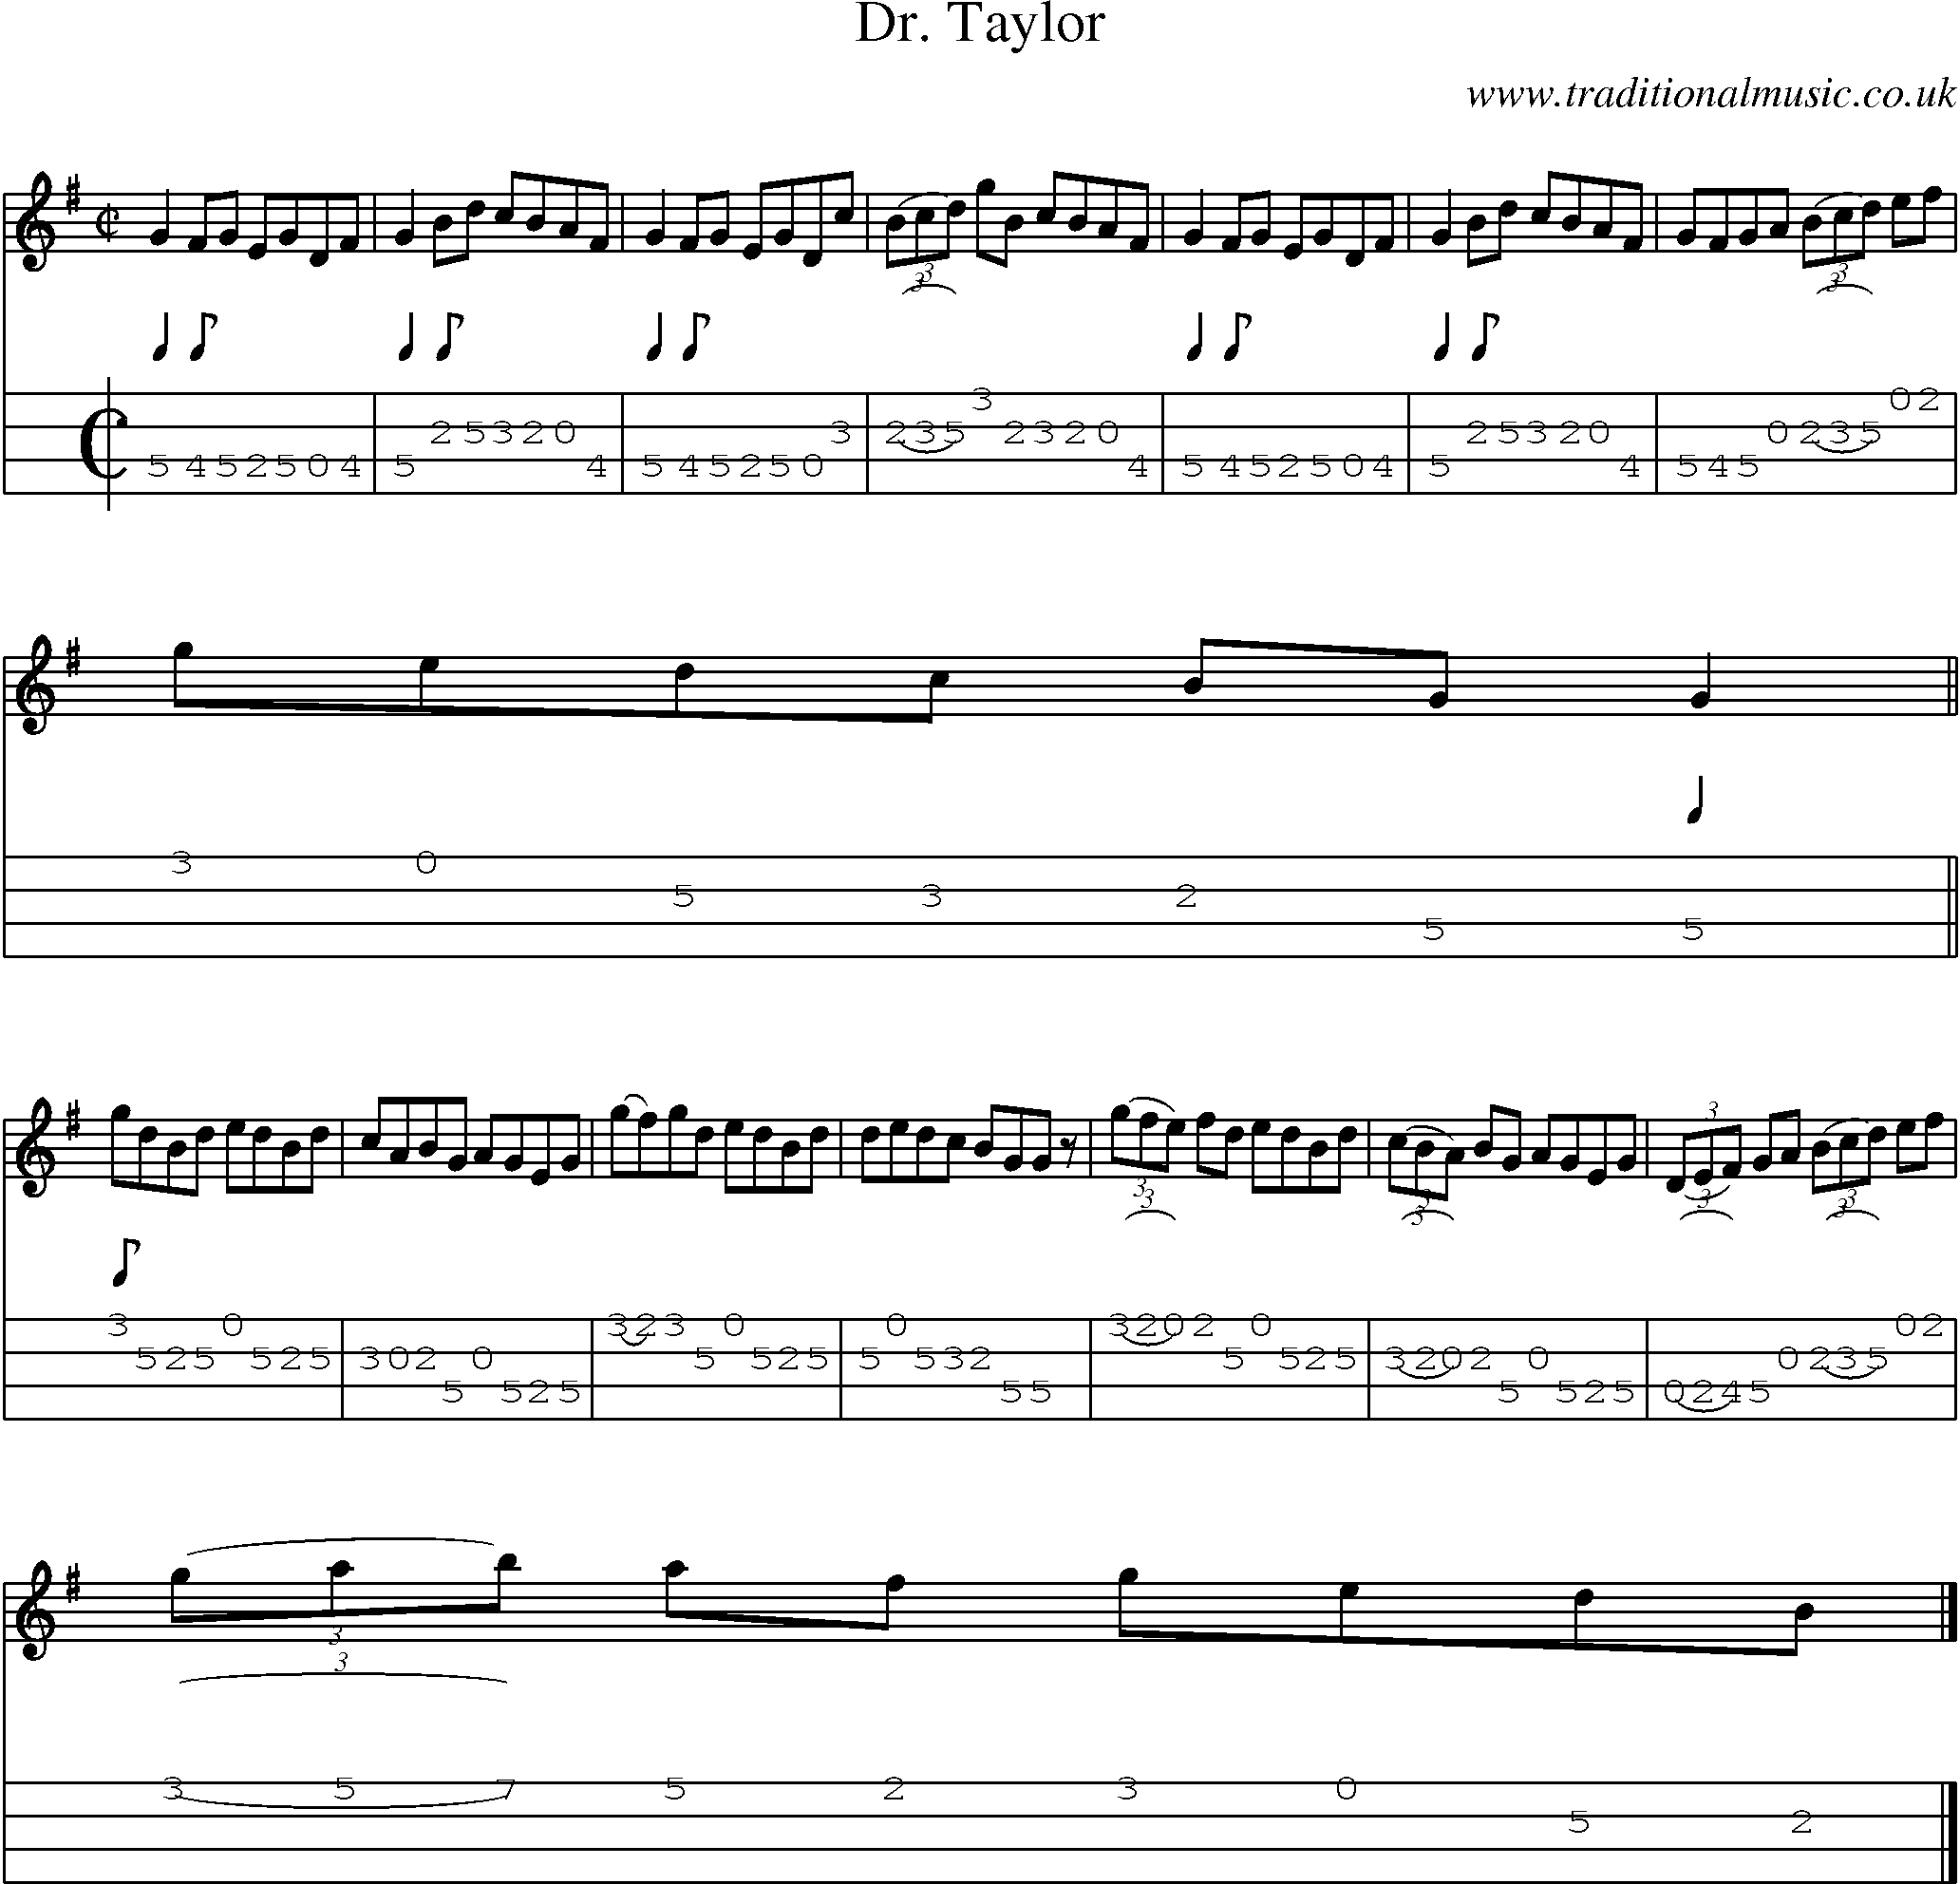 Music Score and Mandolin Tabs for Dr Taylor